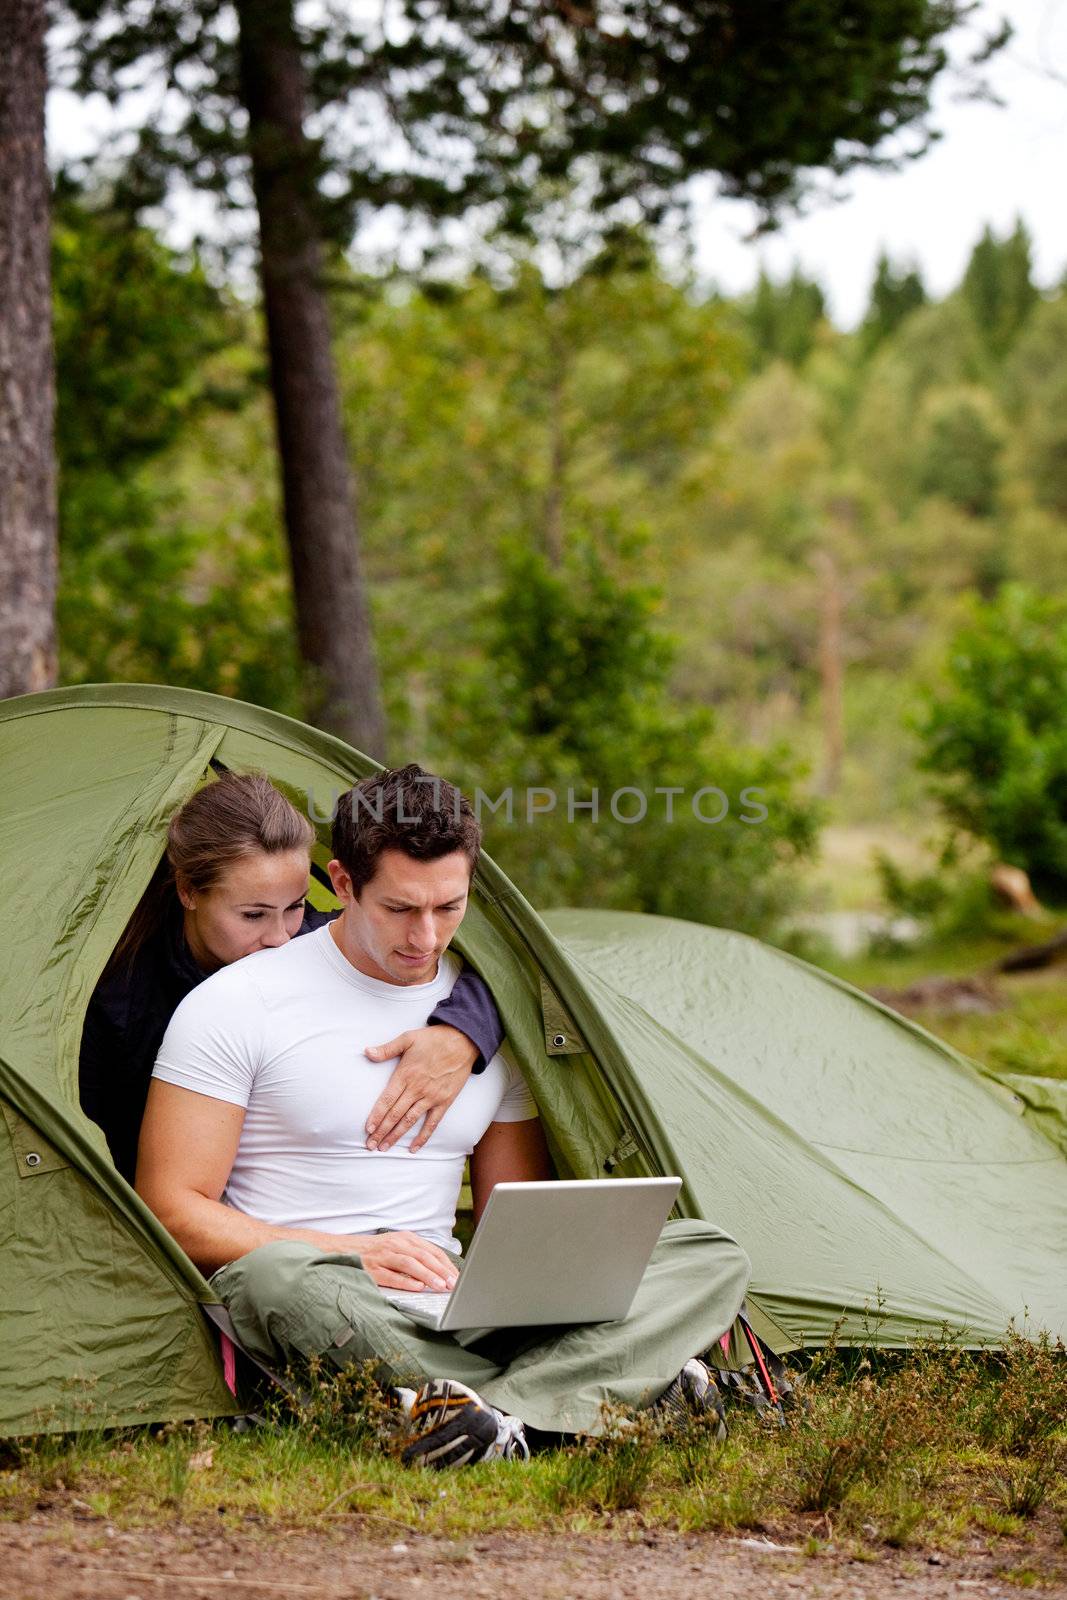 Computer Outdoor Tent by leaf